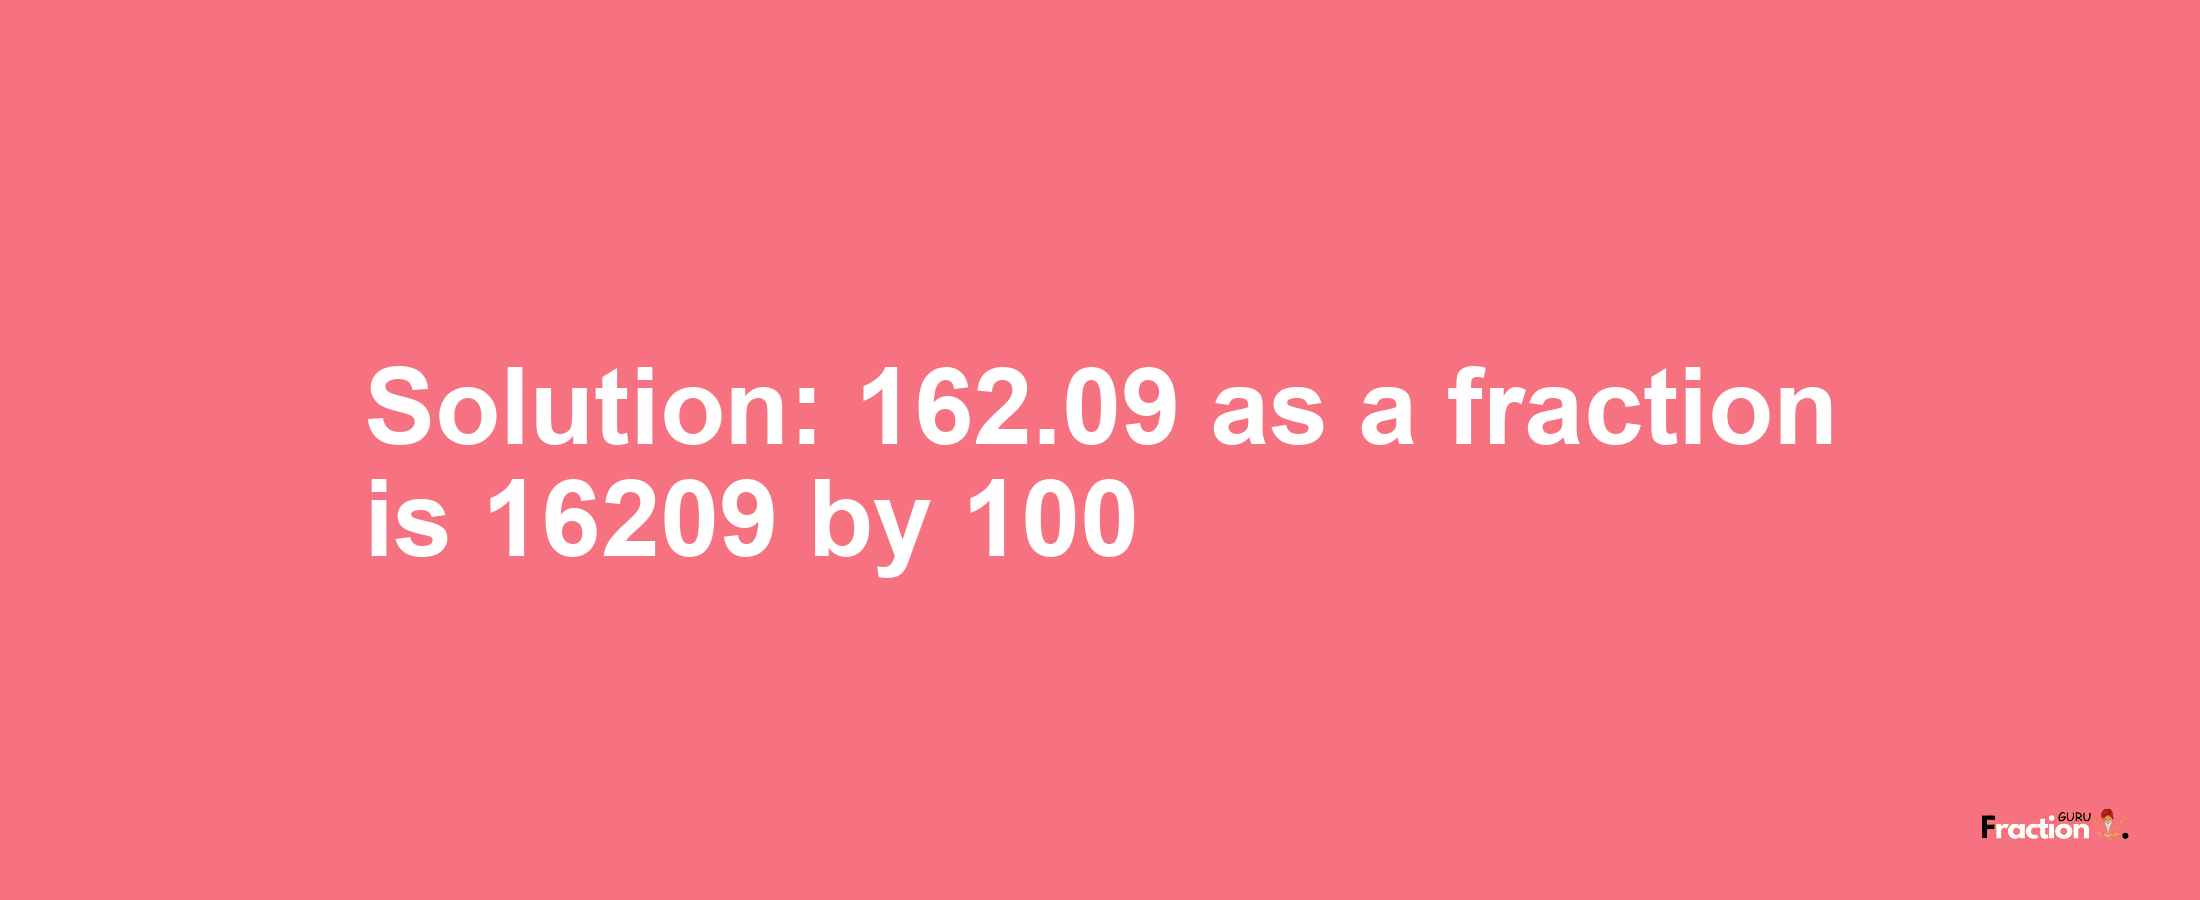 Solution:162.09 as a fraction is 16209/100